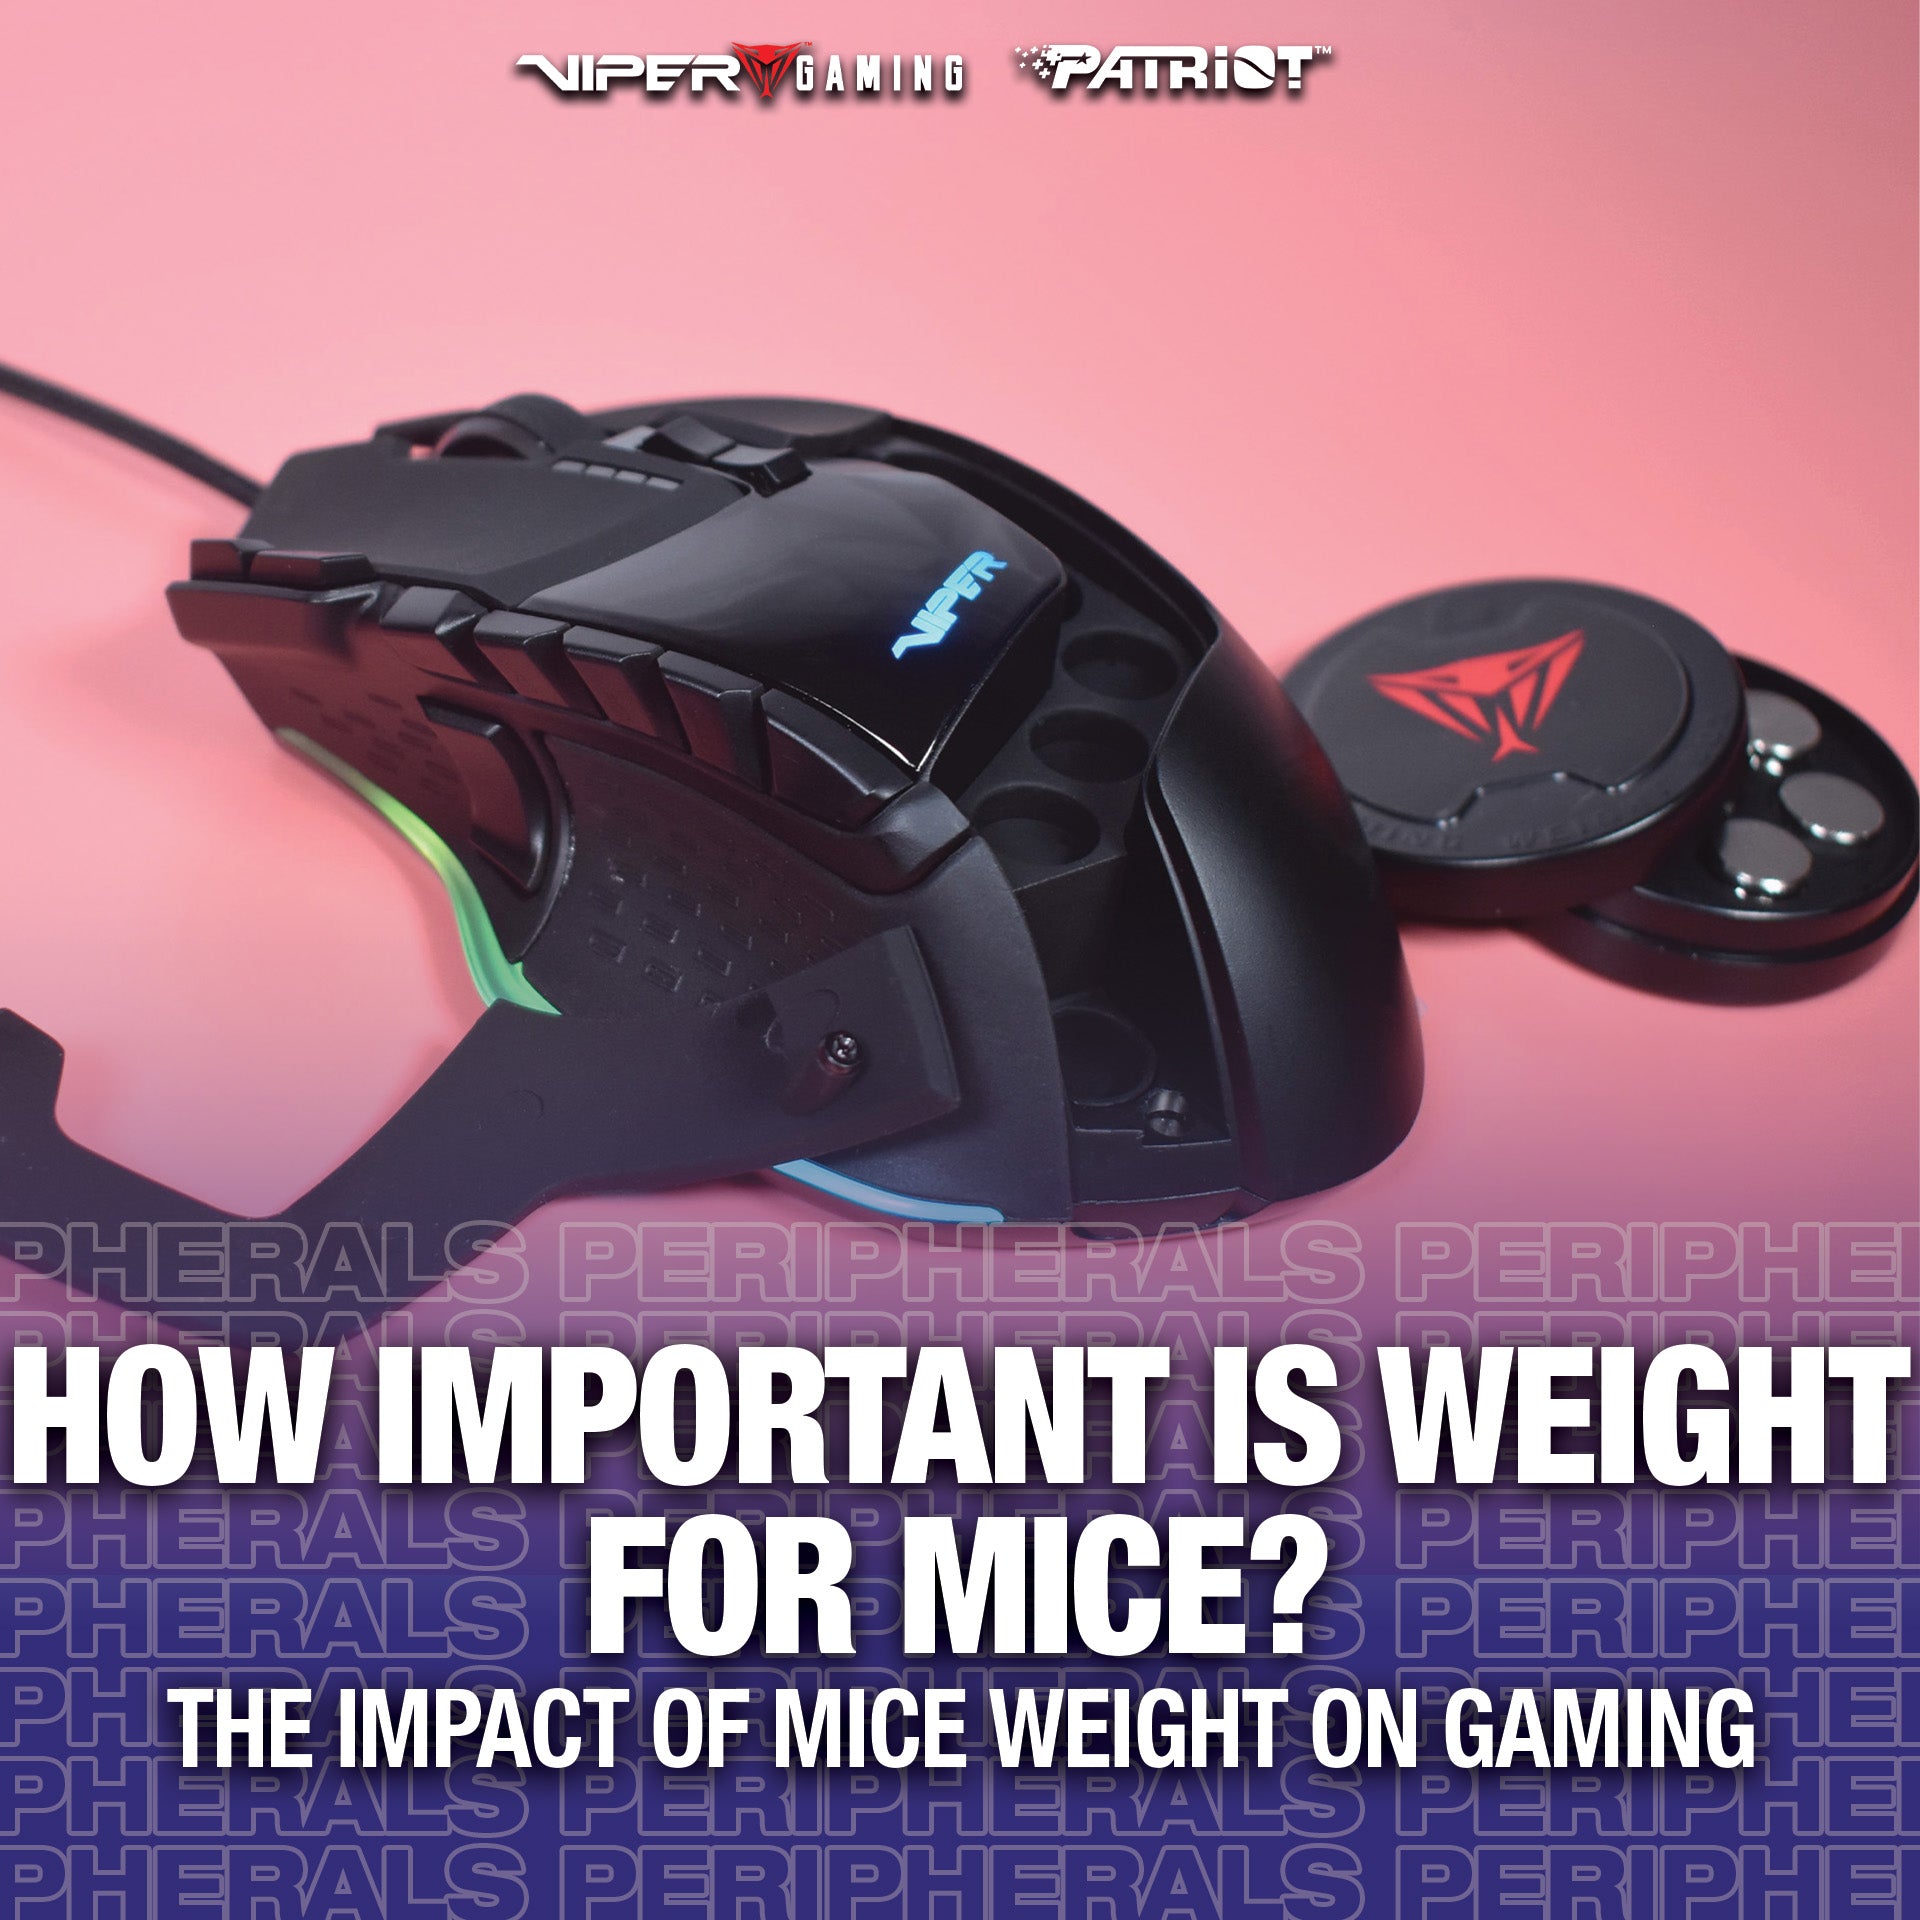 How Important is Weight for Mice?